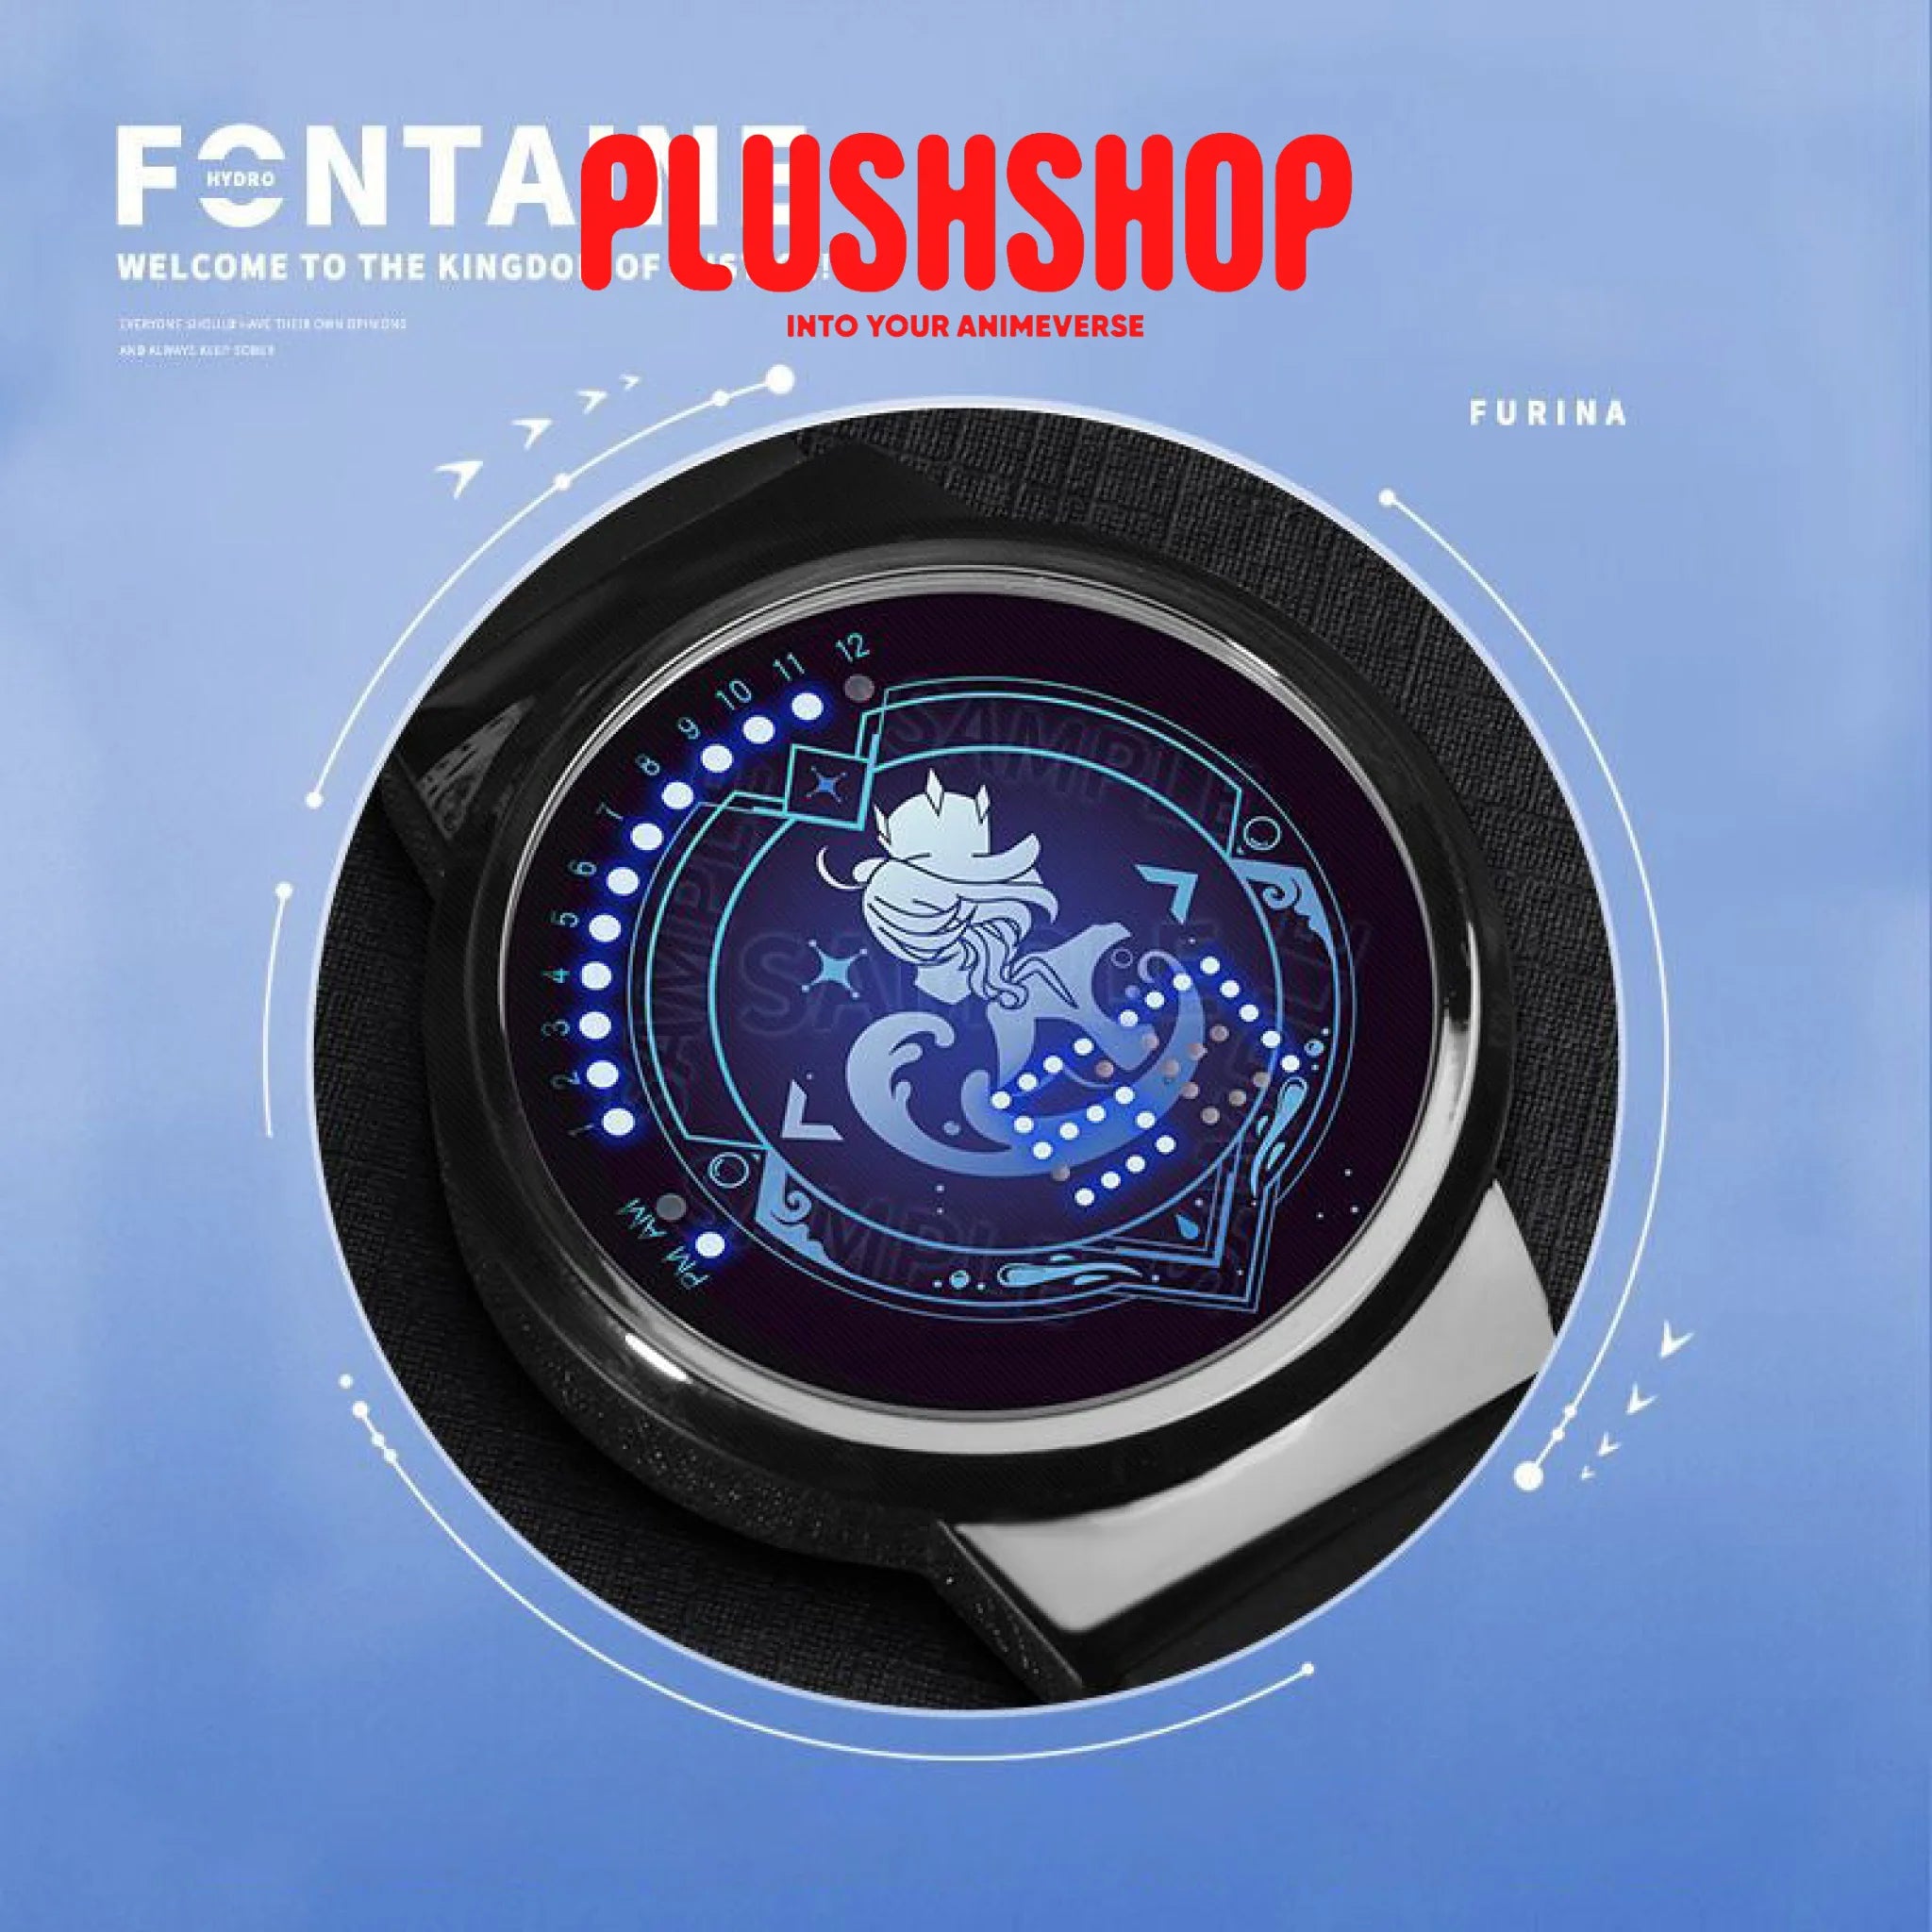 Genshin Impact Fontaine Characters Led Animation Watch Peripheral Waterproof Touch Screen Furina 手表